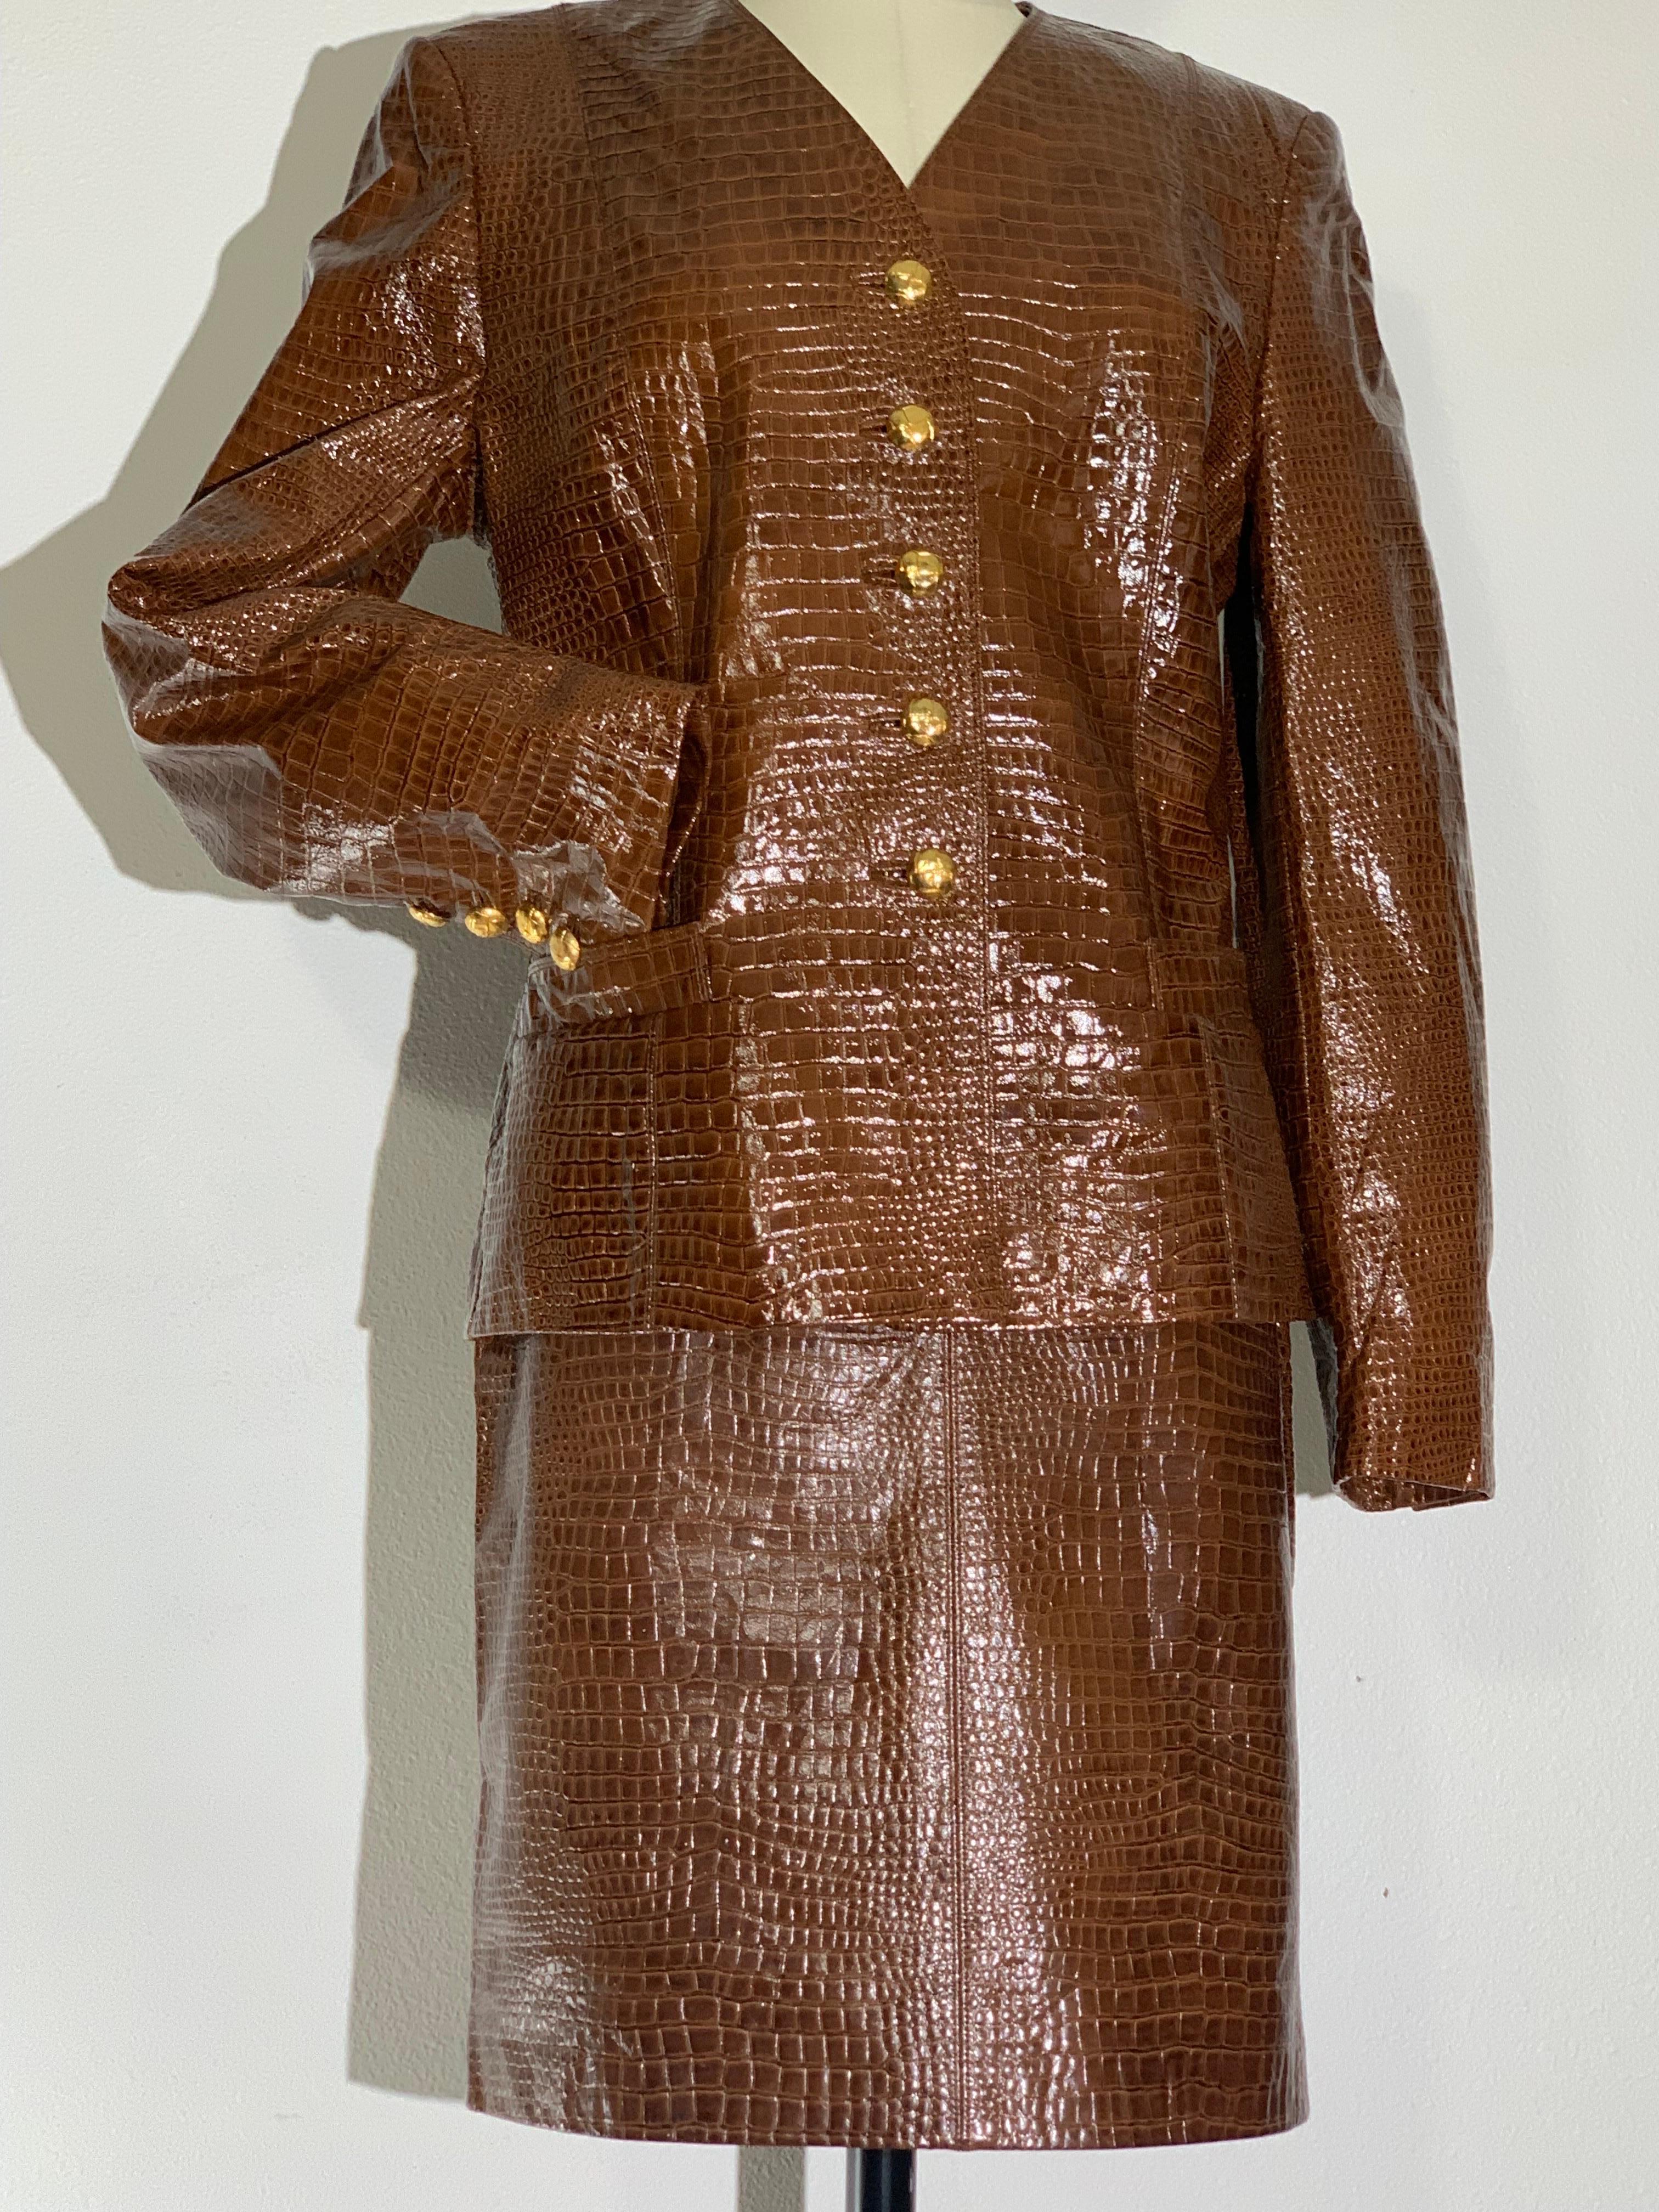 1980s Escada Brown Patent Leather Crocodile Embossed Skirt Suit w Large Gold Buttons: Collar-less suit w darted back for a fitted tailored silhouette. Signature Escada menswear-inspired design with large gold crocodile image buttons at center front